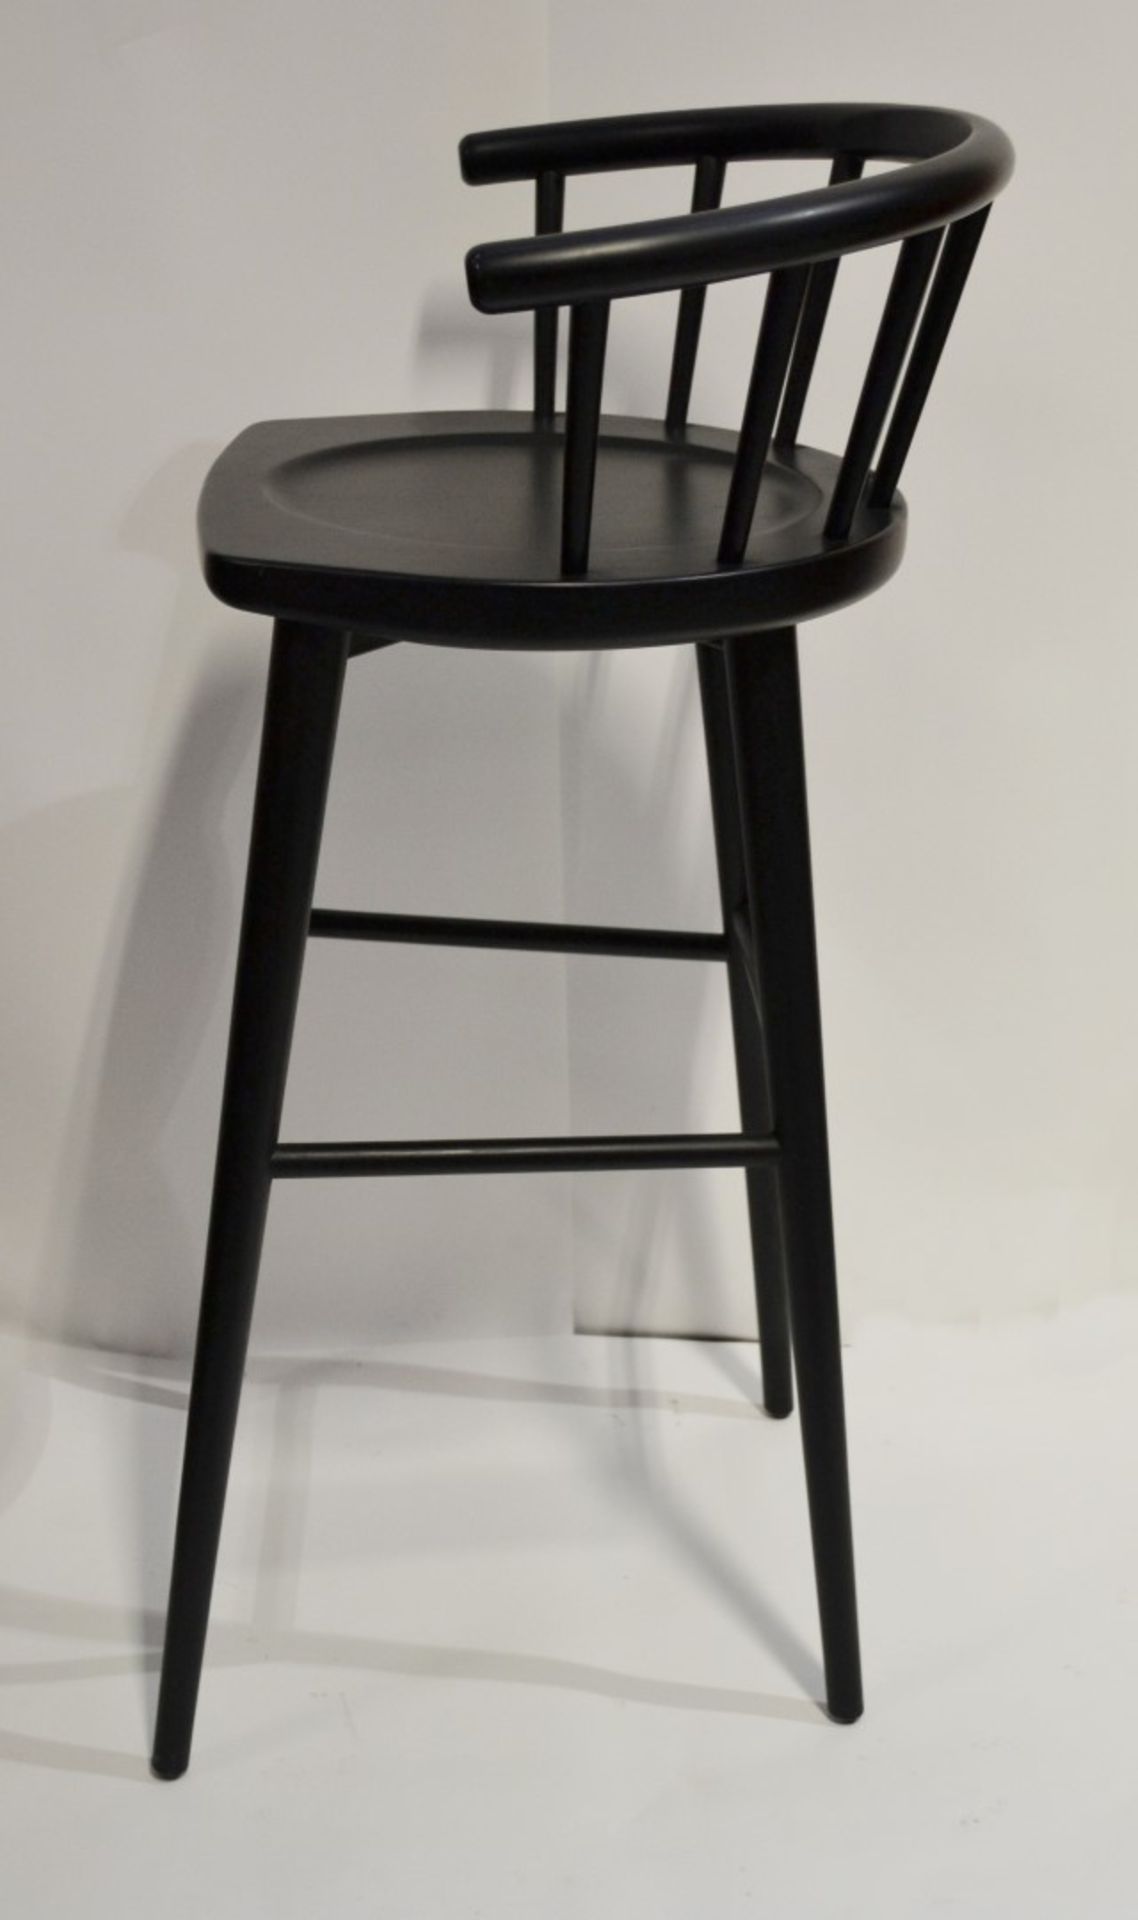 4 x Curved Spindleback Wooden Bar Stools With Shaped Seats, Chrome Footrests and Dark Finish - - Image 6 of 6